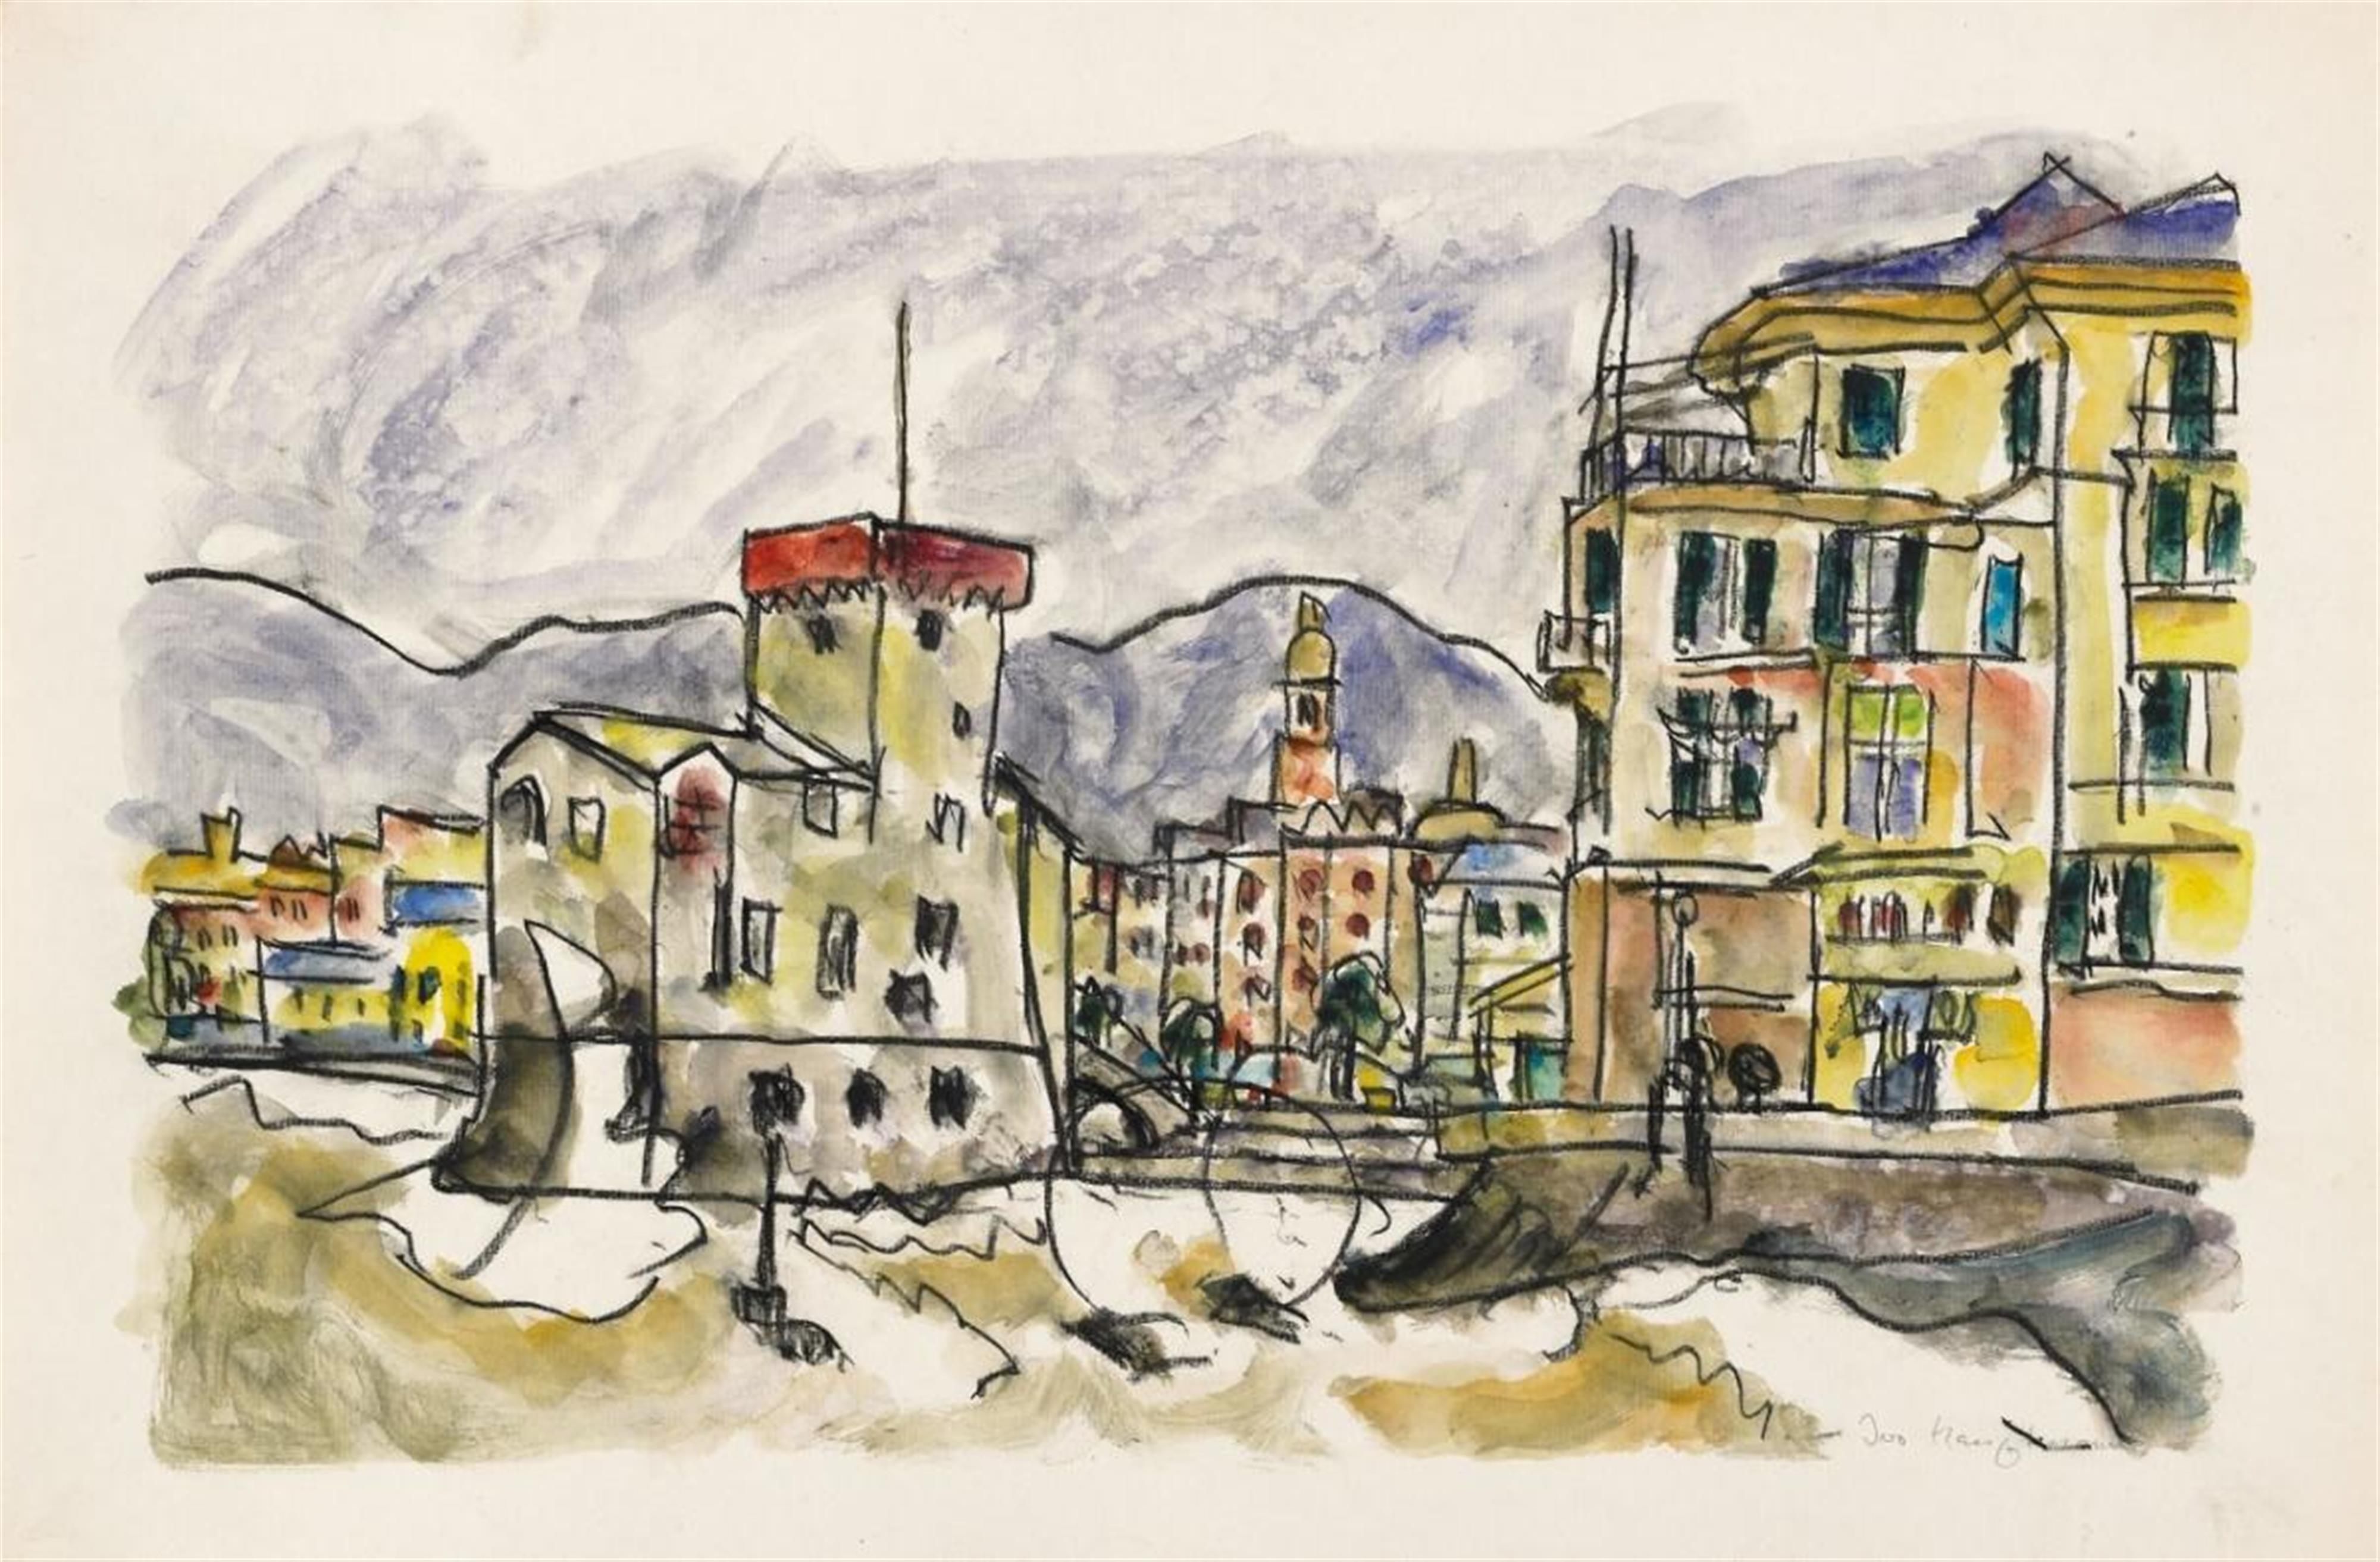 Ivo Hauptmann - Upper Italy (View of a City; Harbor with Boats) - image-2